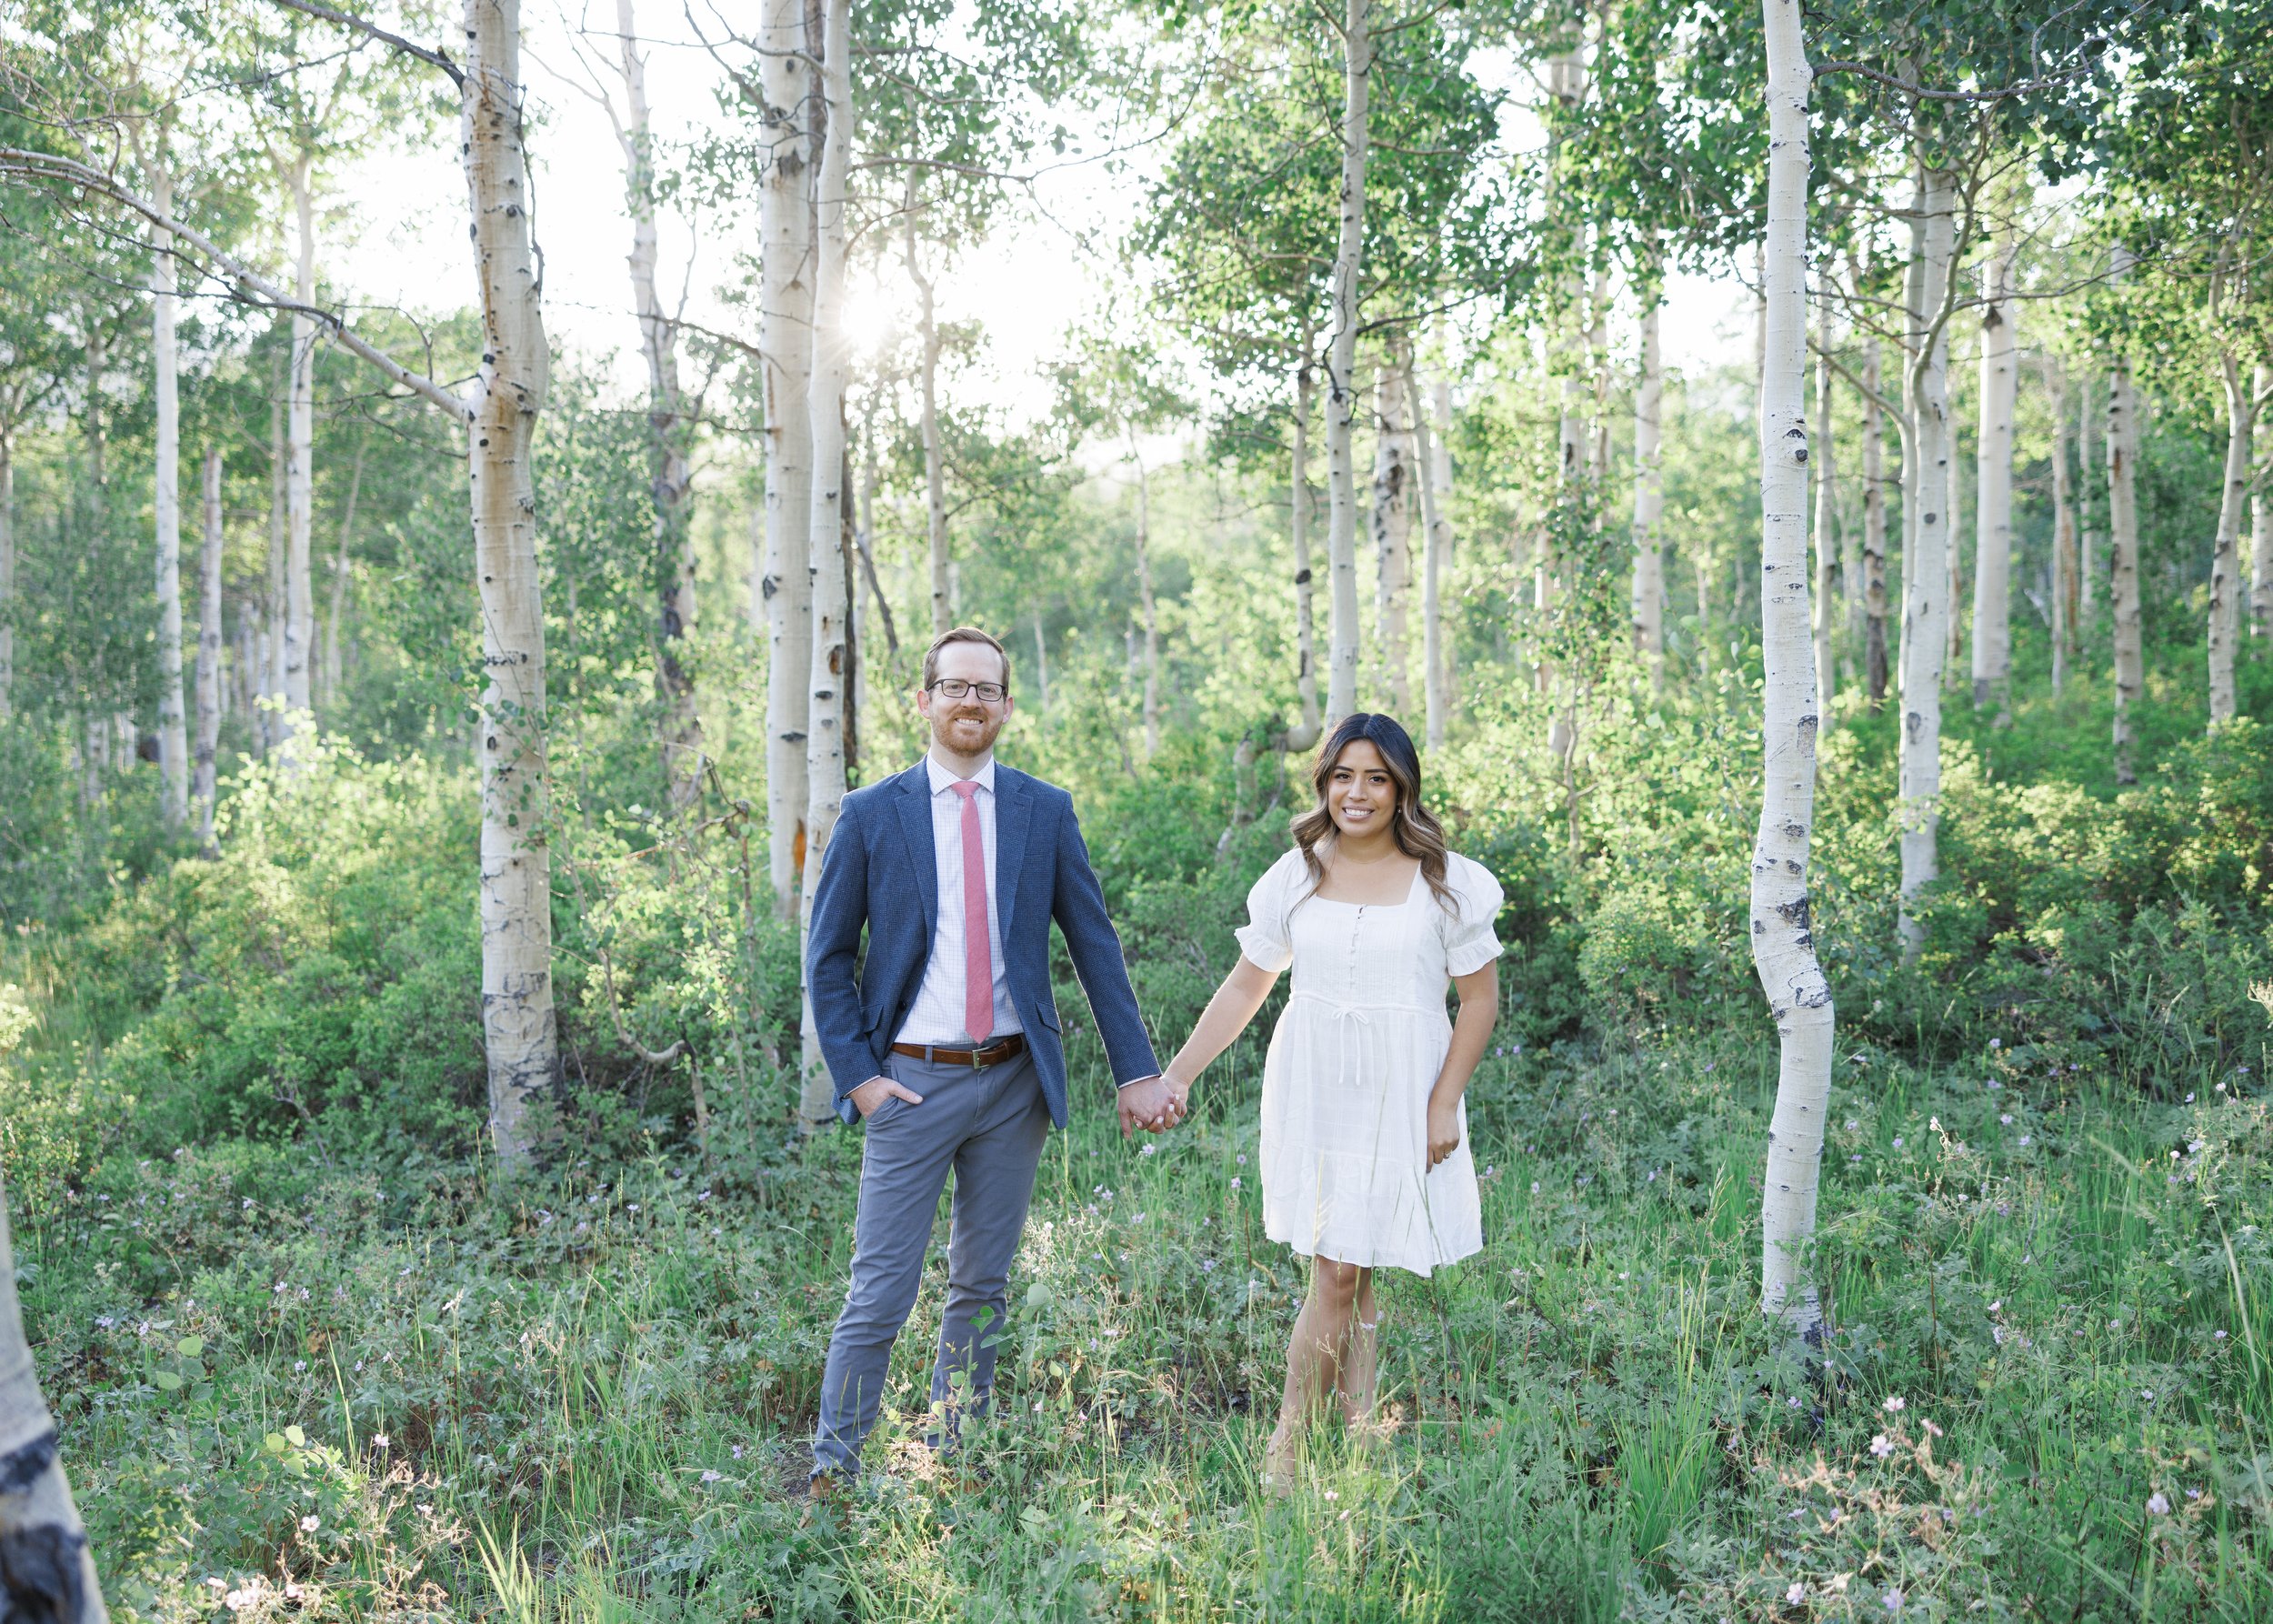  Savanna Richardson Photography captures an engaged couple holding hands in an aspen forest. Mountain engagement ideas #ParkCityEngagements #ParkCityPhotographers #SavannaRichardsonPhotography #SavannaRichardsonEngagements 